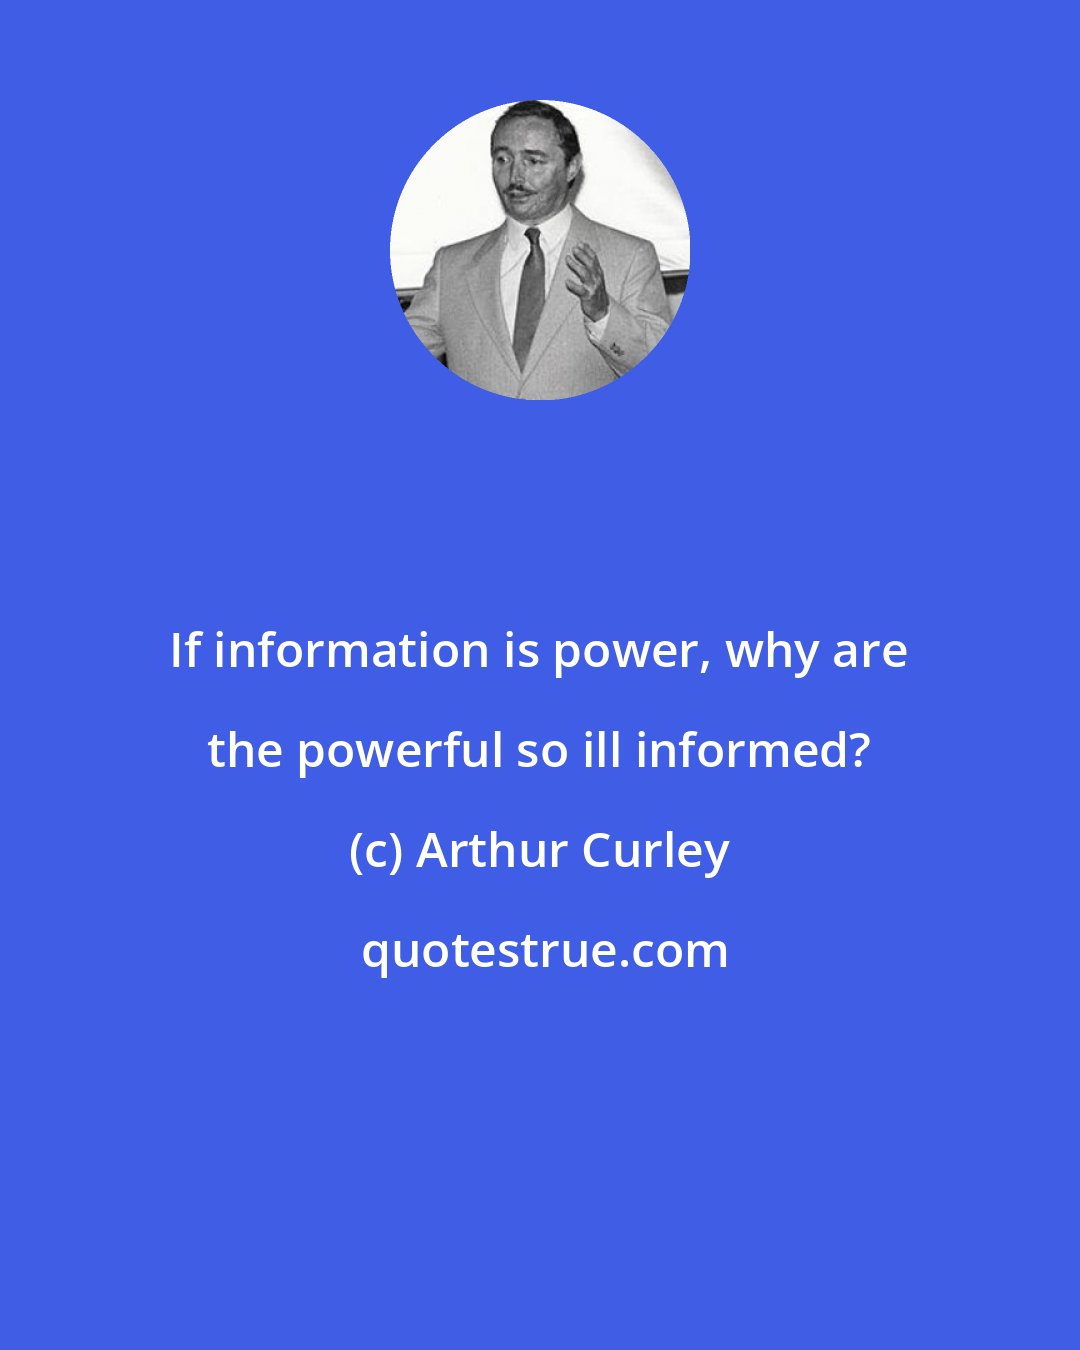 Arthur Curley: If information is power, why are the powerful so ill informed?